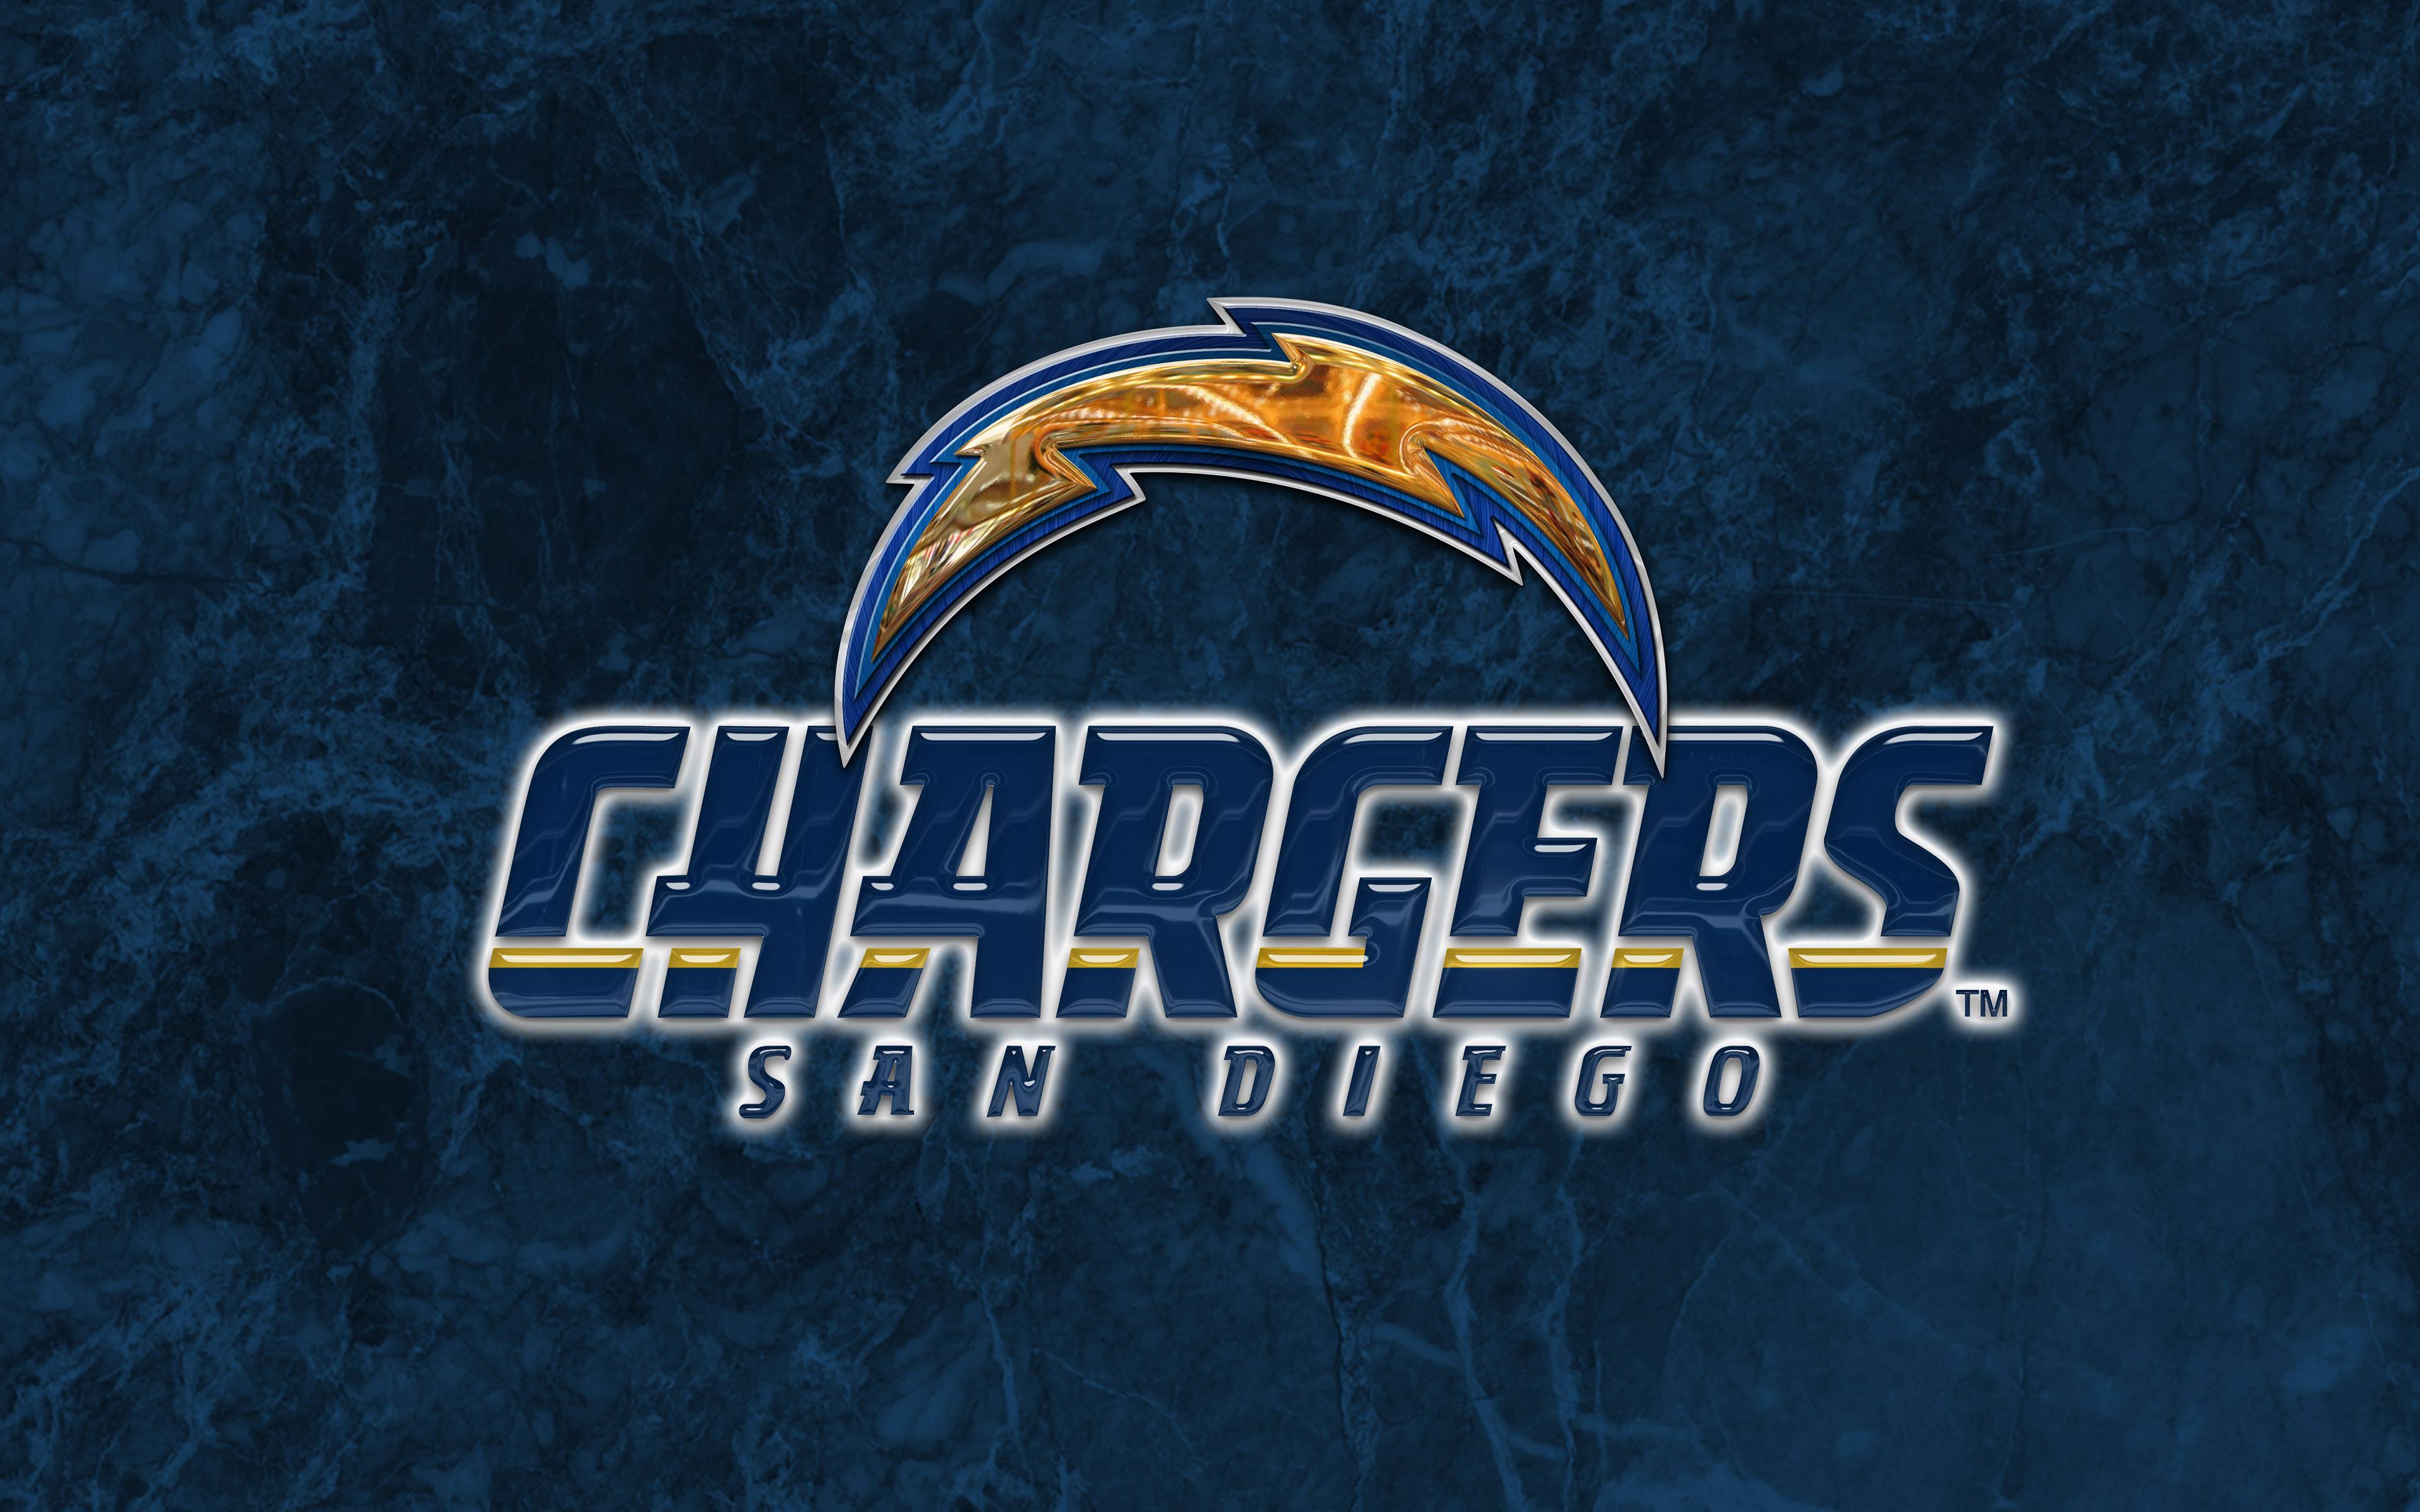 San Diego Chargers 2014 NFL Logo Wallpaper Wide or HD. Sports